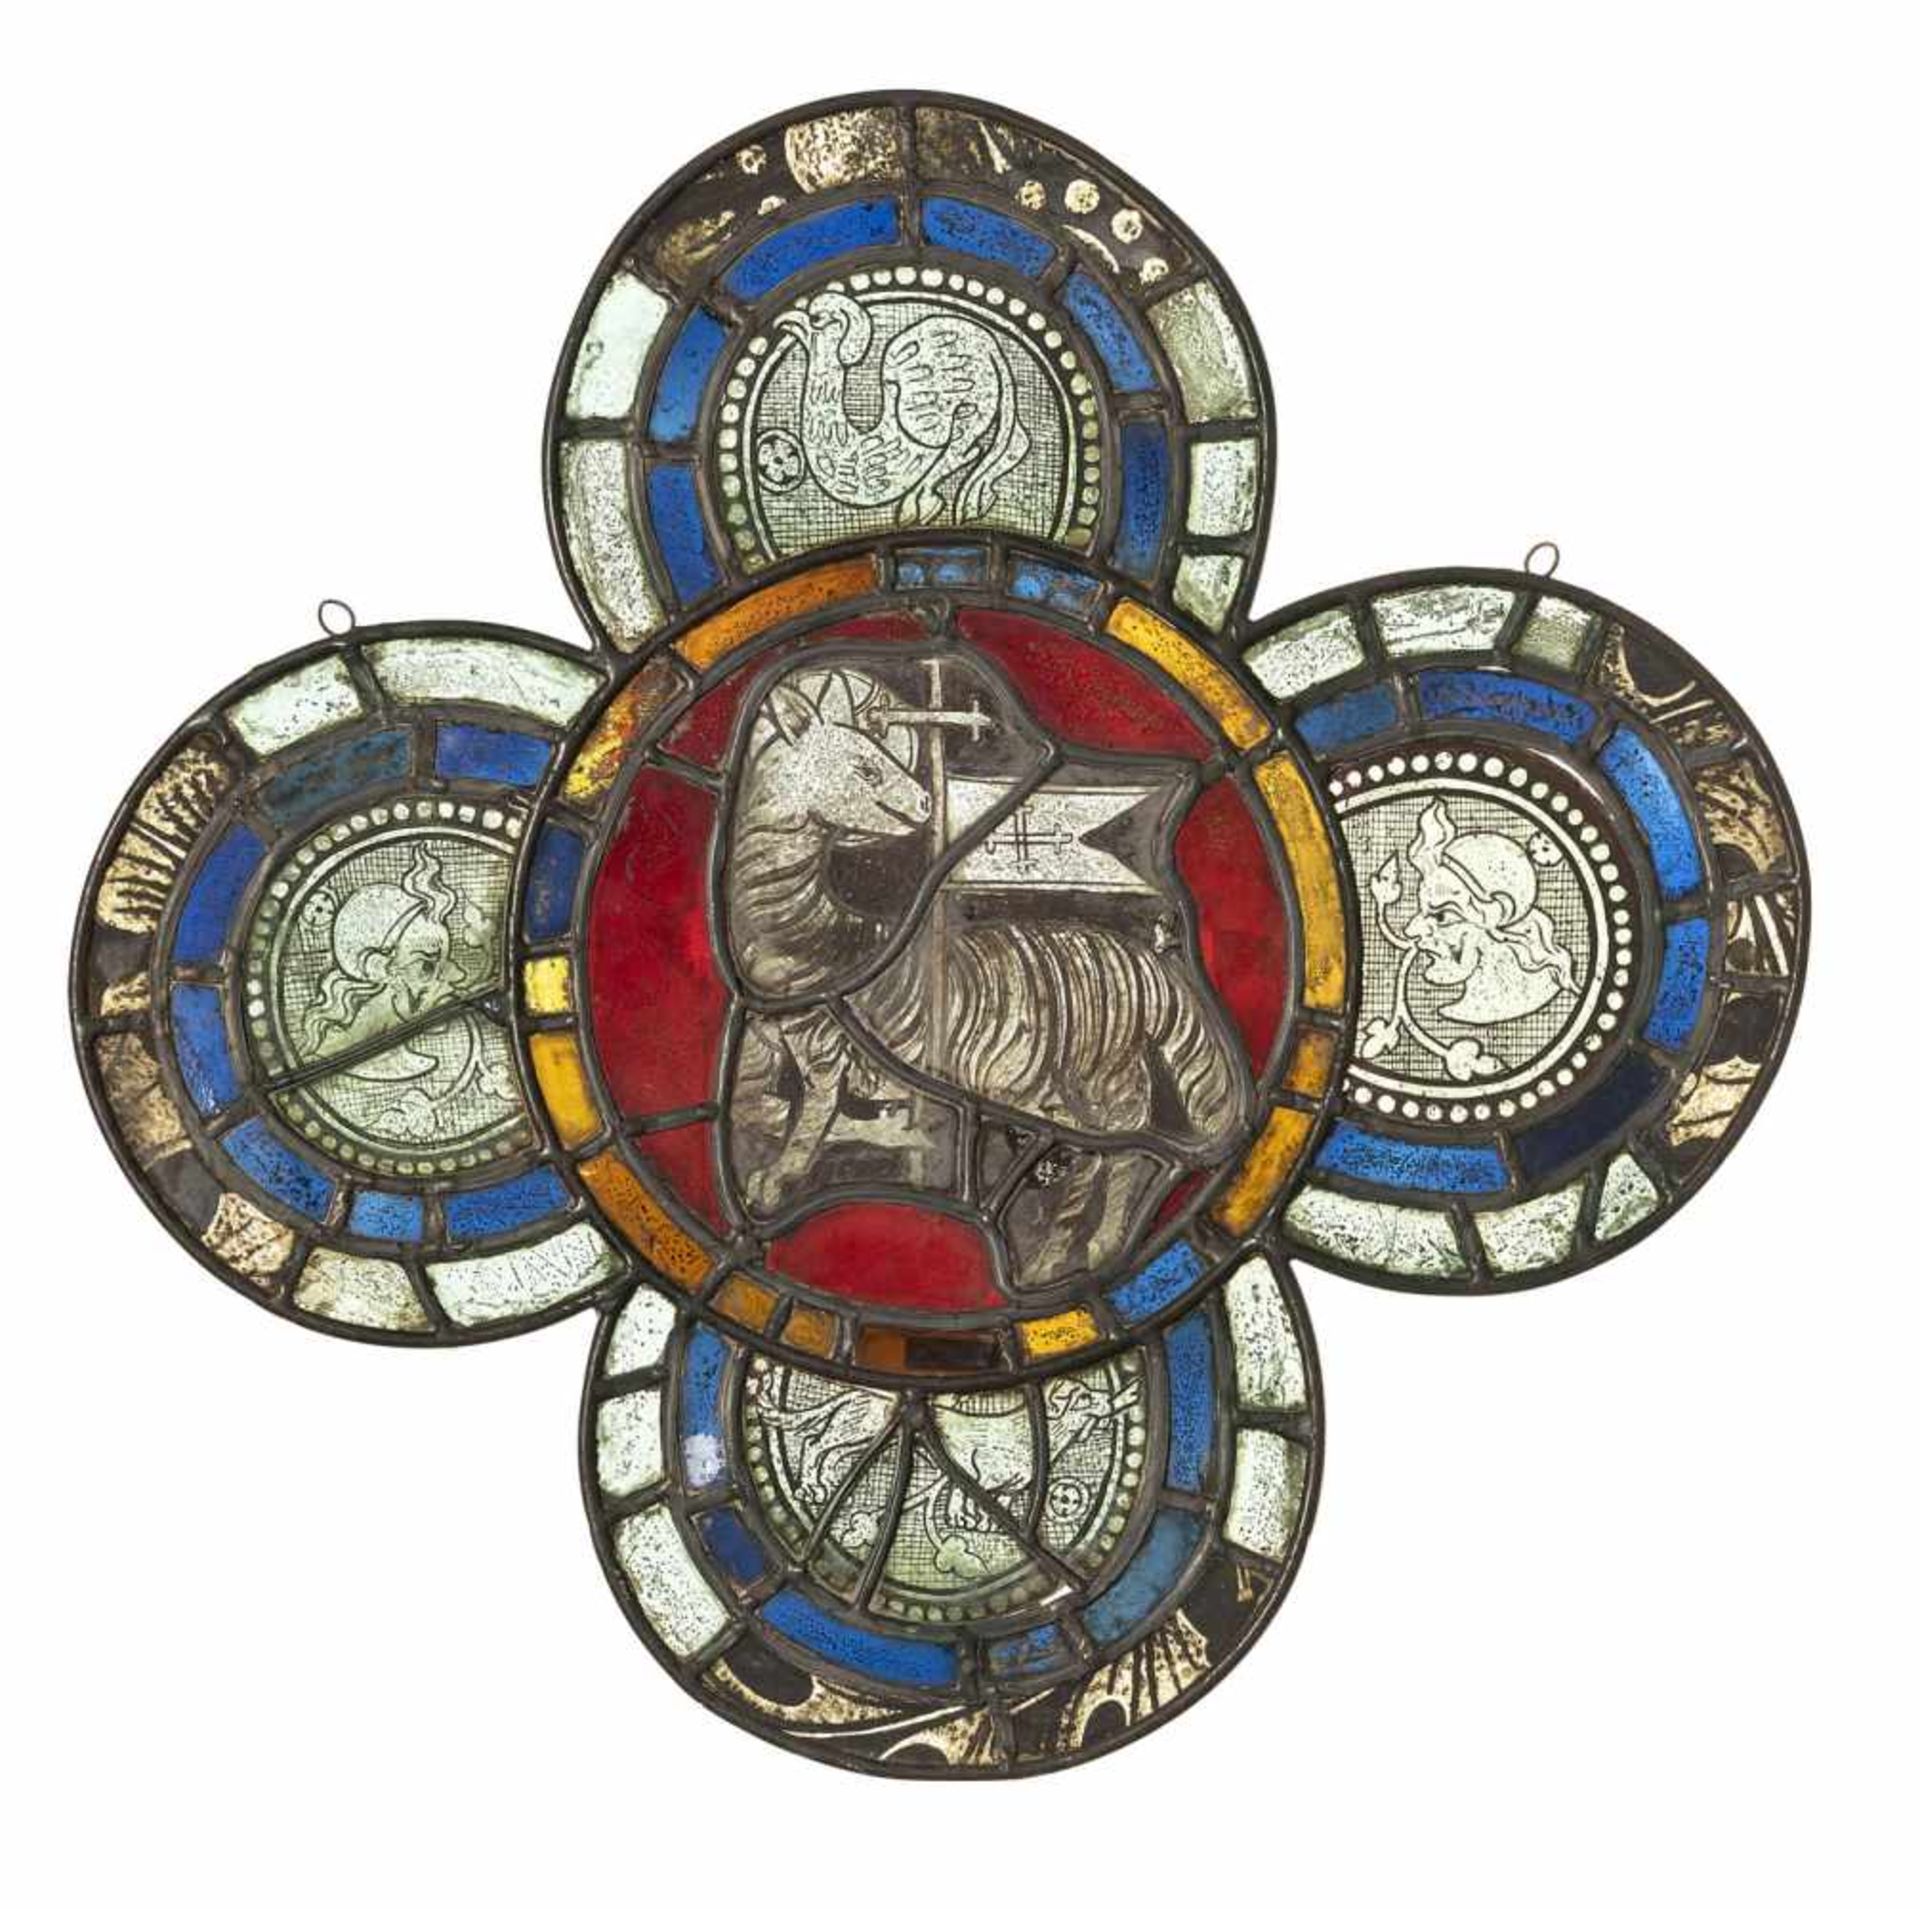 A PROBABLY FRENCH MEDIEVAL STAINED GLASS WINDOW WITH AGNUS DEI, c. 1400. Clear glass with black